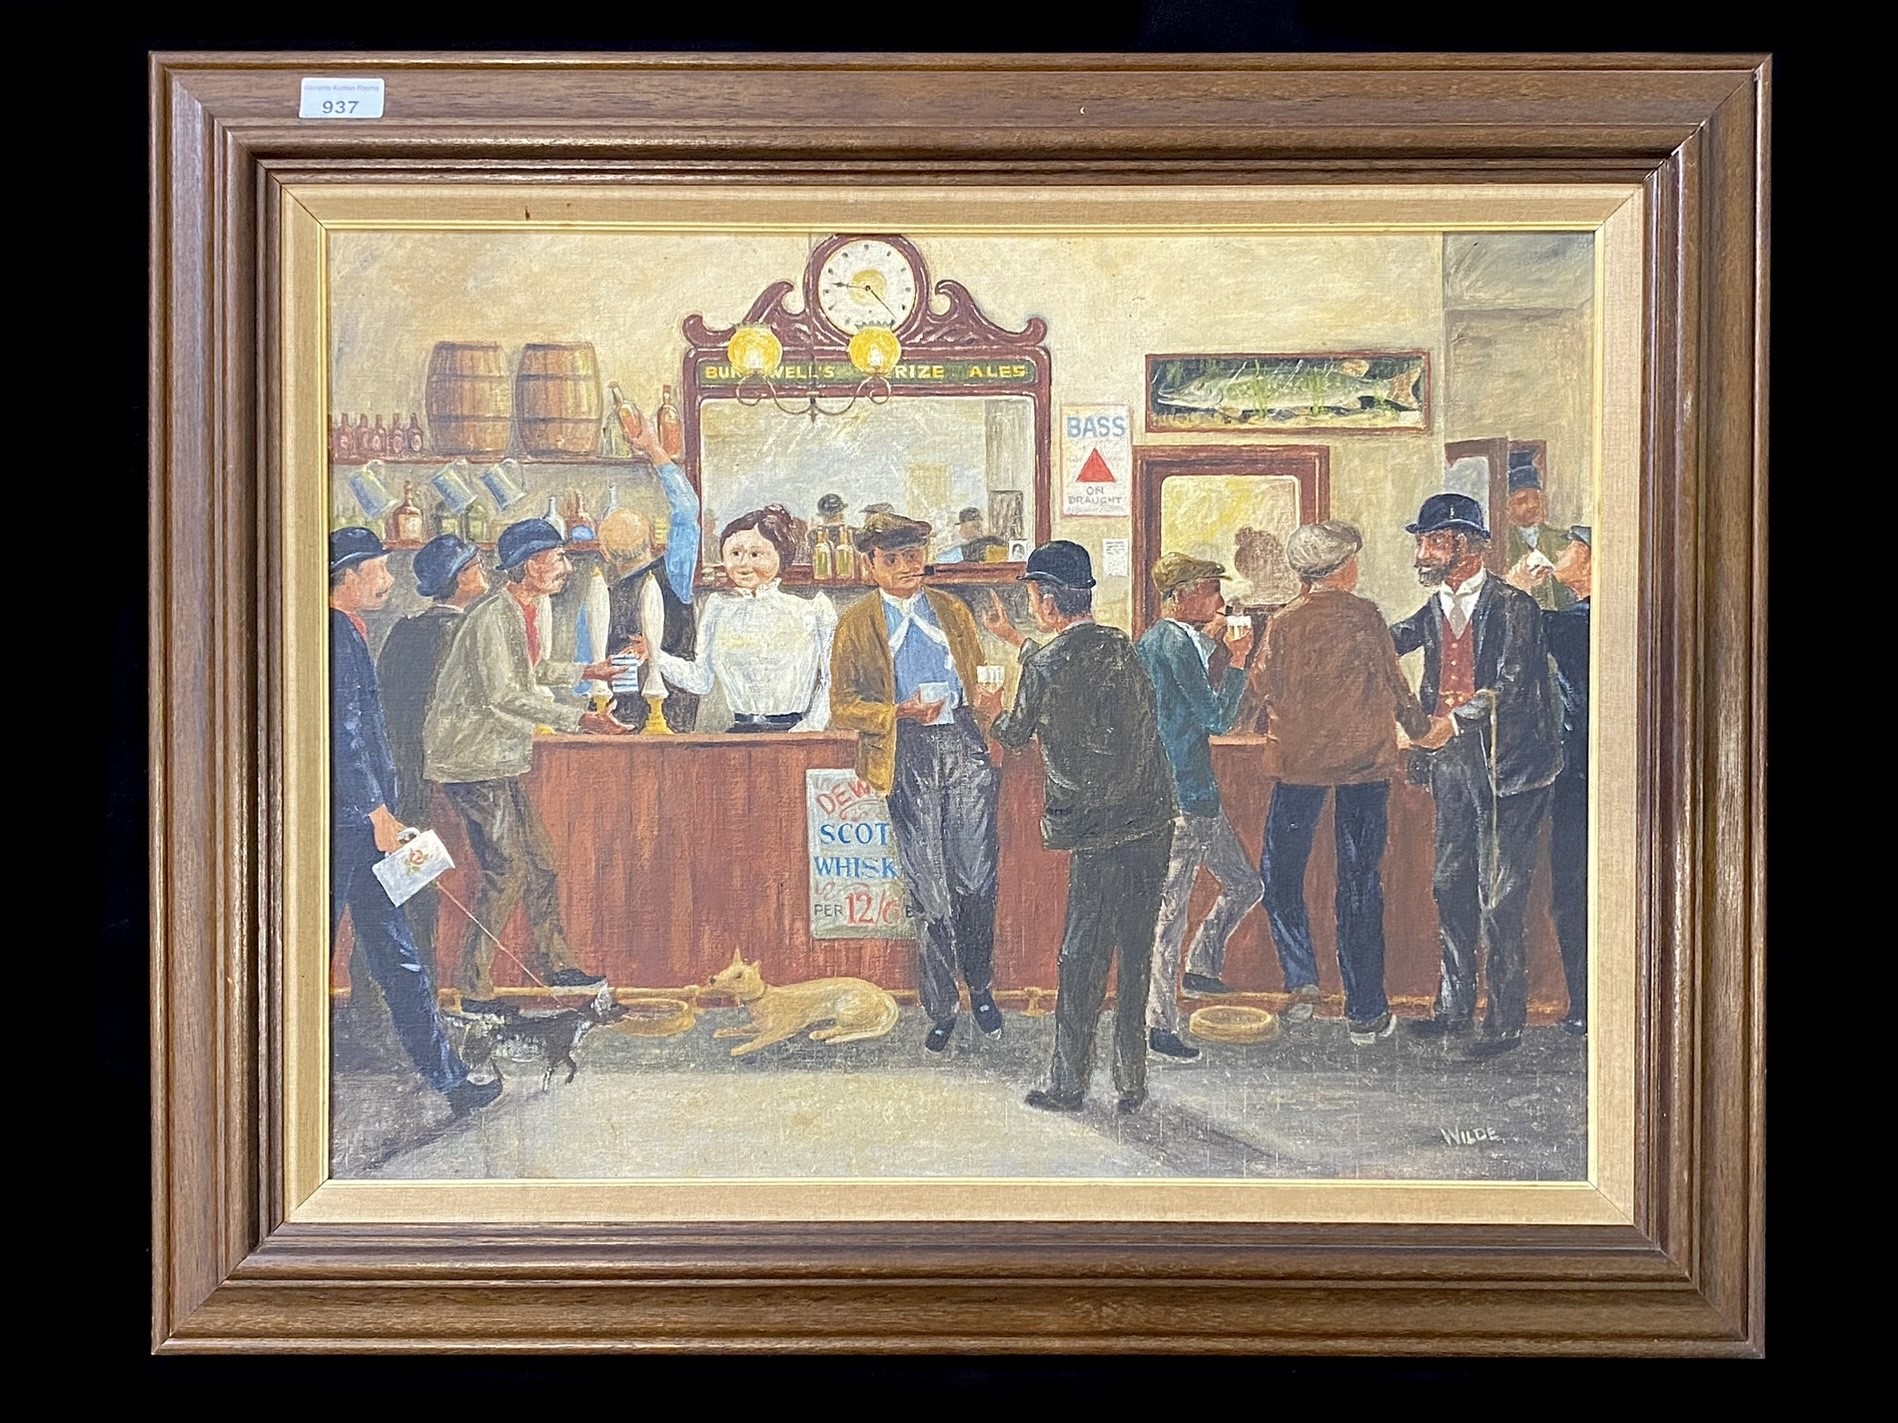 Fred Wilde Original Oil on Board, titled 'To the Bar', framed, signed, measures 24" x 30" overall.